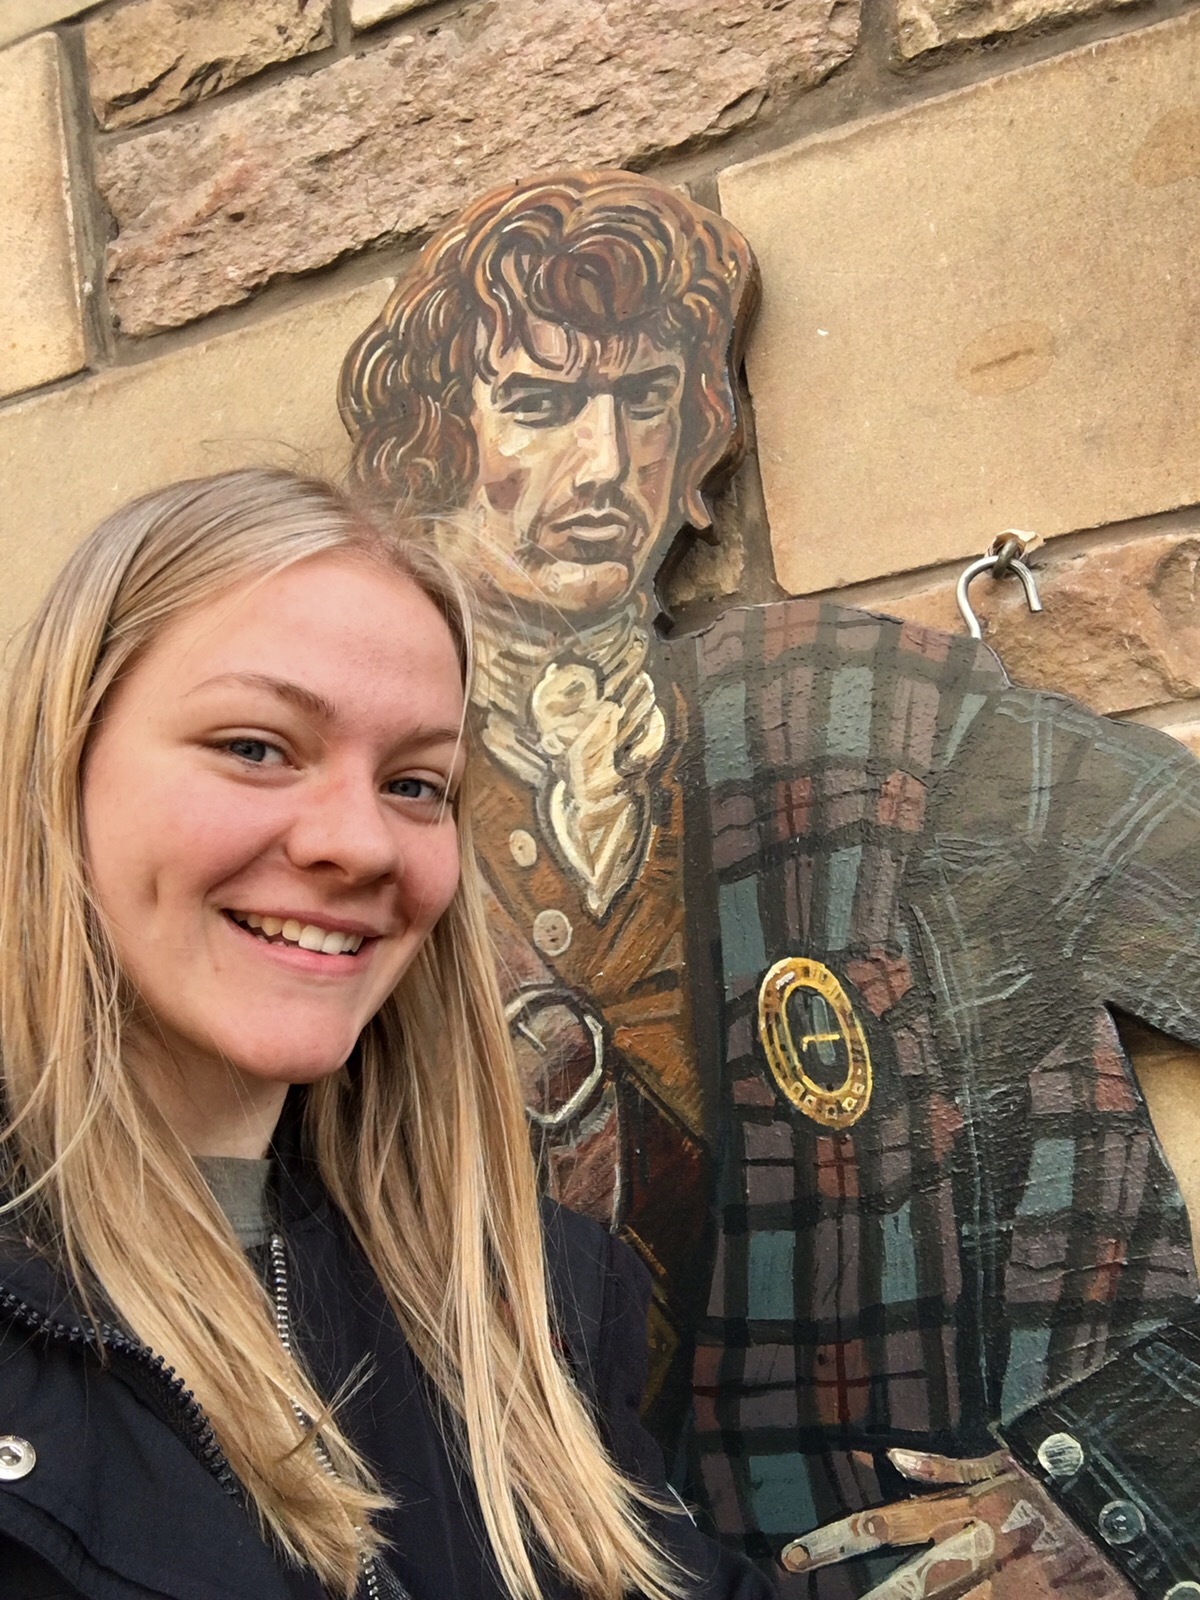 After reading “Outlander,” Marli Watson was inspired to take a trip to Scotland. The cardboard cutout is of Jamie Fraser, the story’s main character.